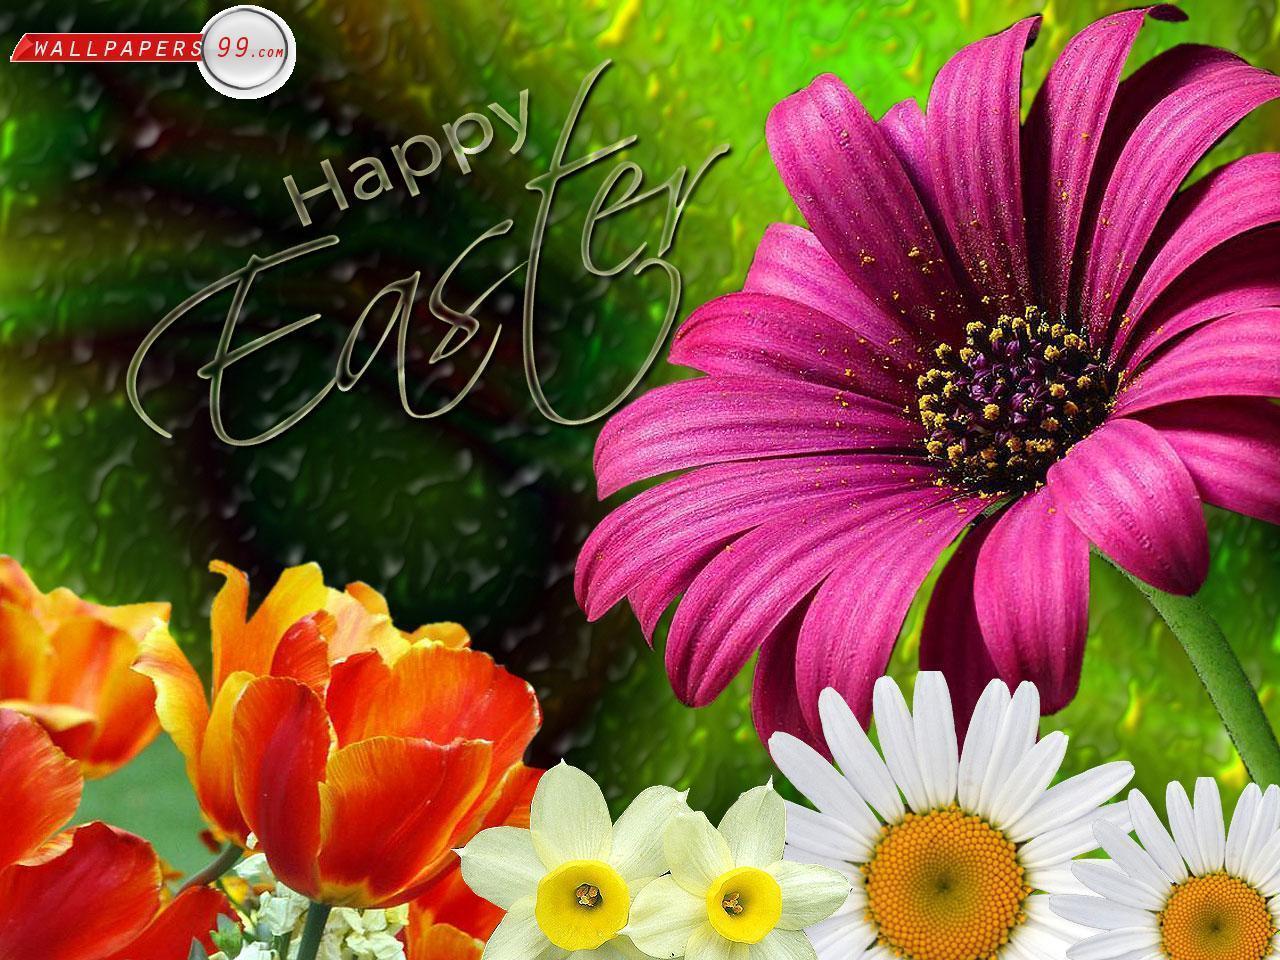 Happy Easter Wallpapers Picture Image 1280x960 35606